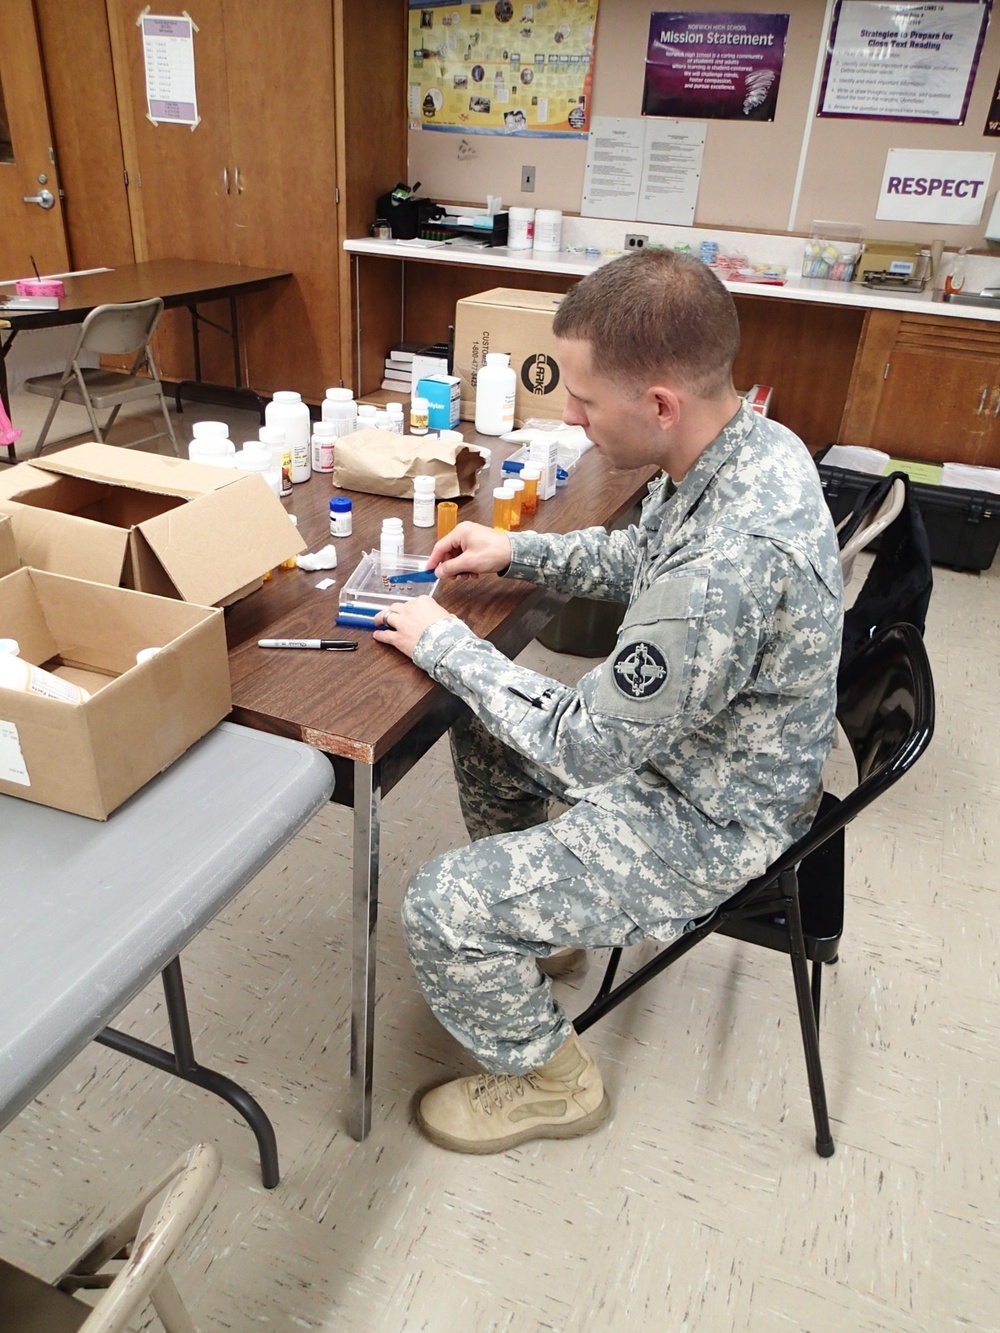 Pharmacy tech dispenses medications during IRT event in Norwich, N.Y.